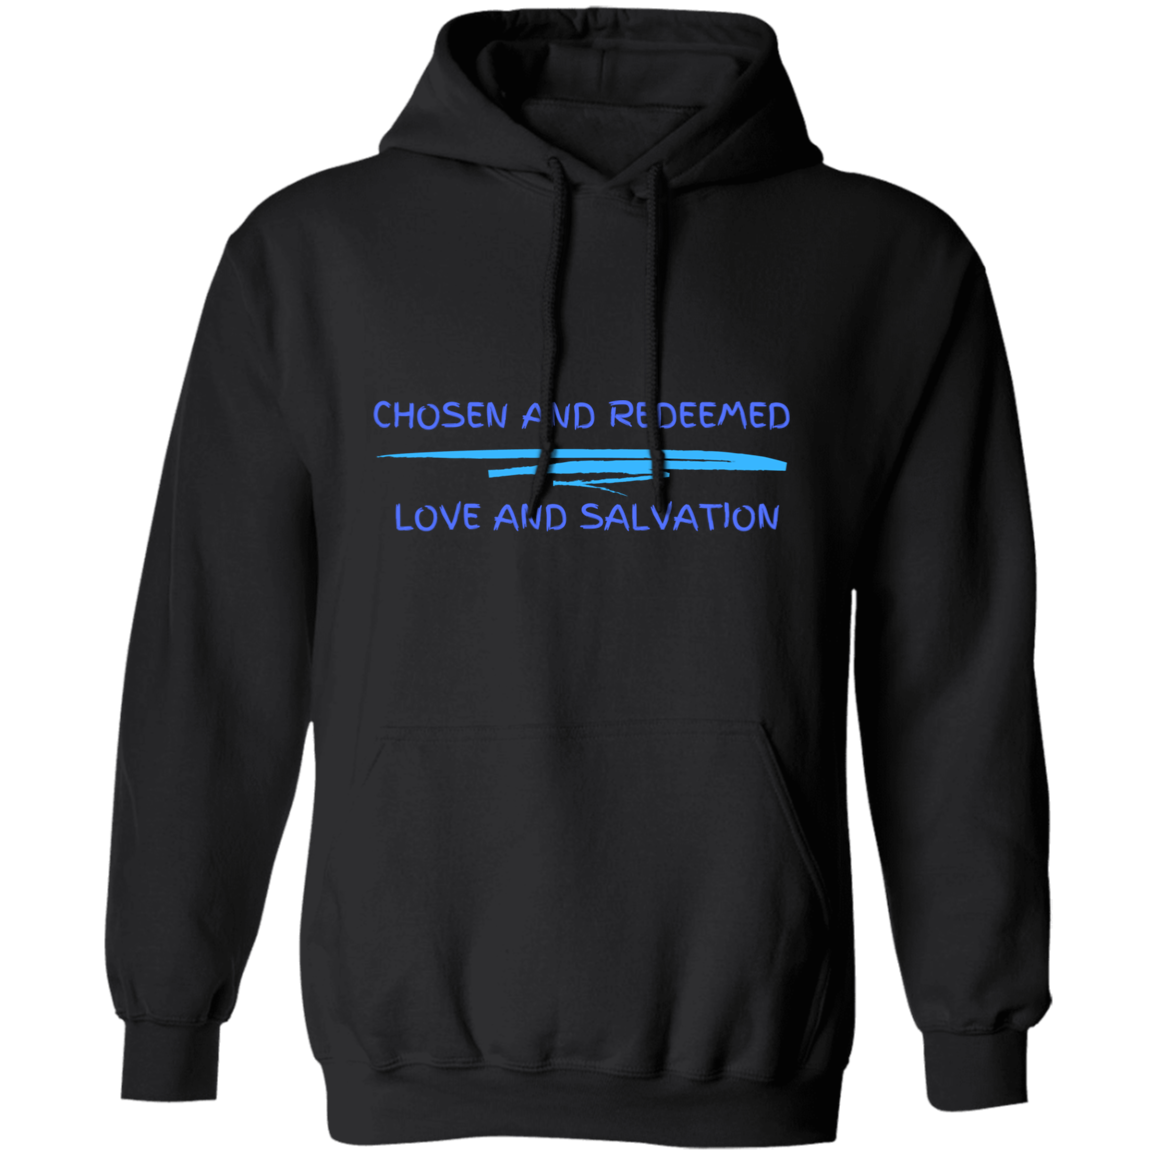 Chosen and Redeemed/Love and Salvation Unisex Pullover Hoodie